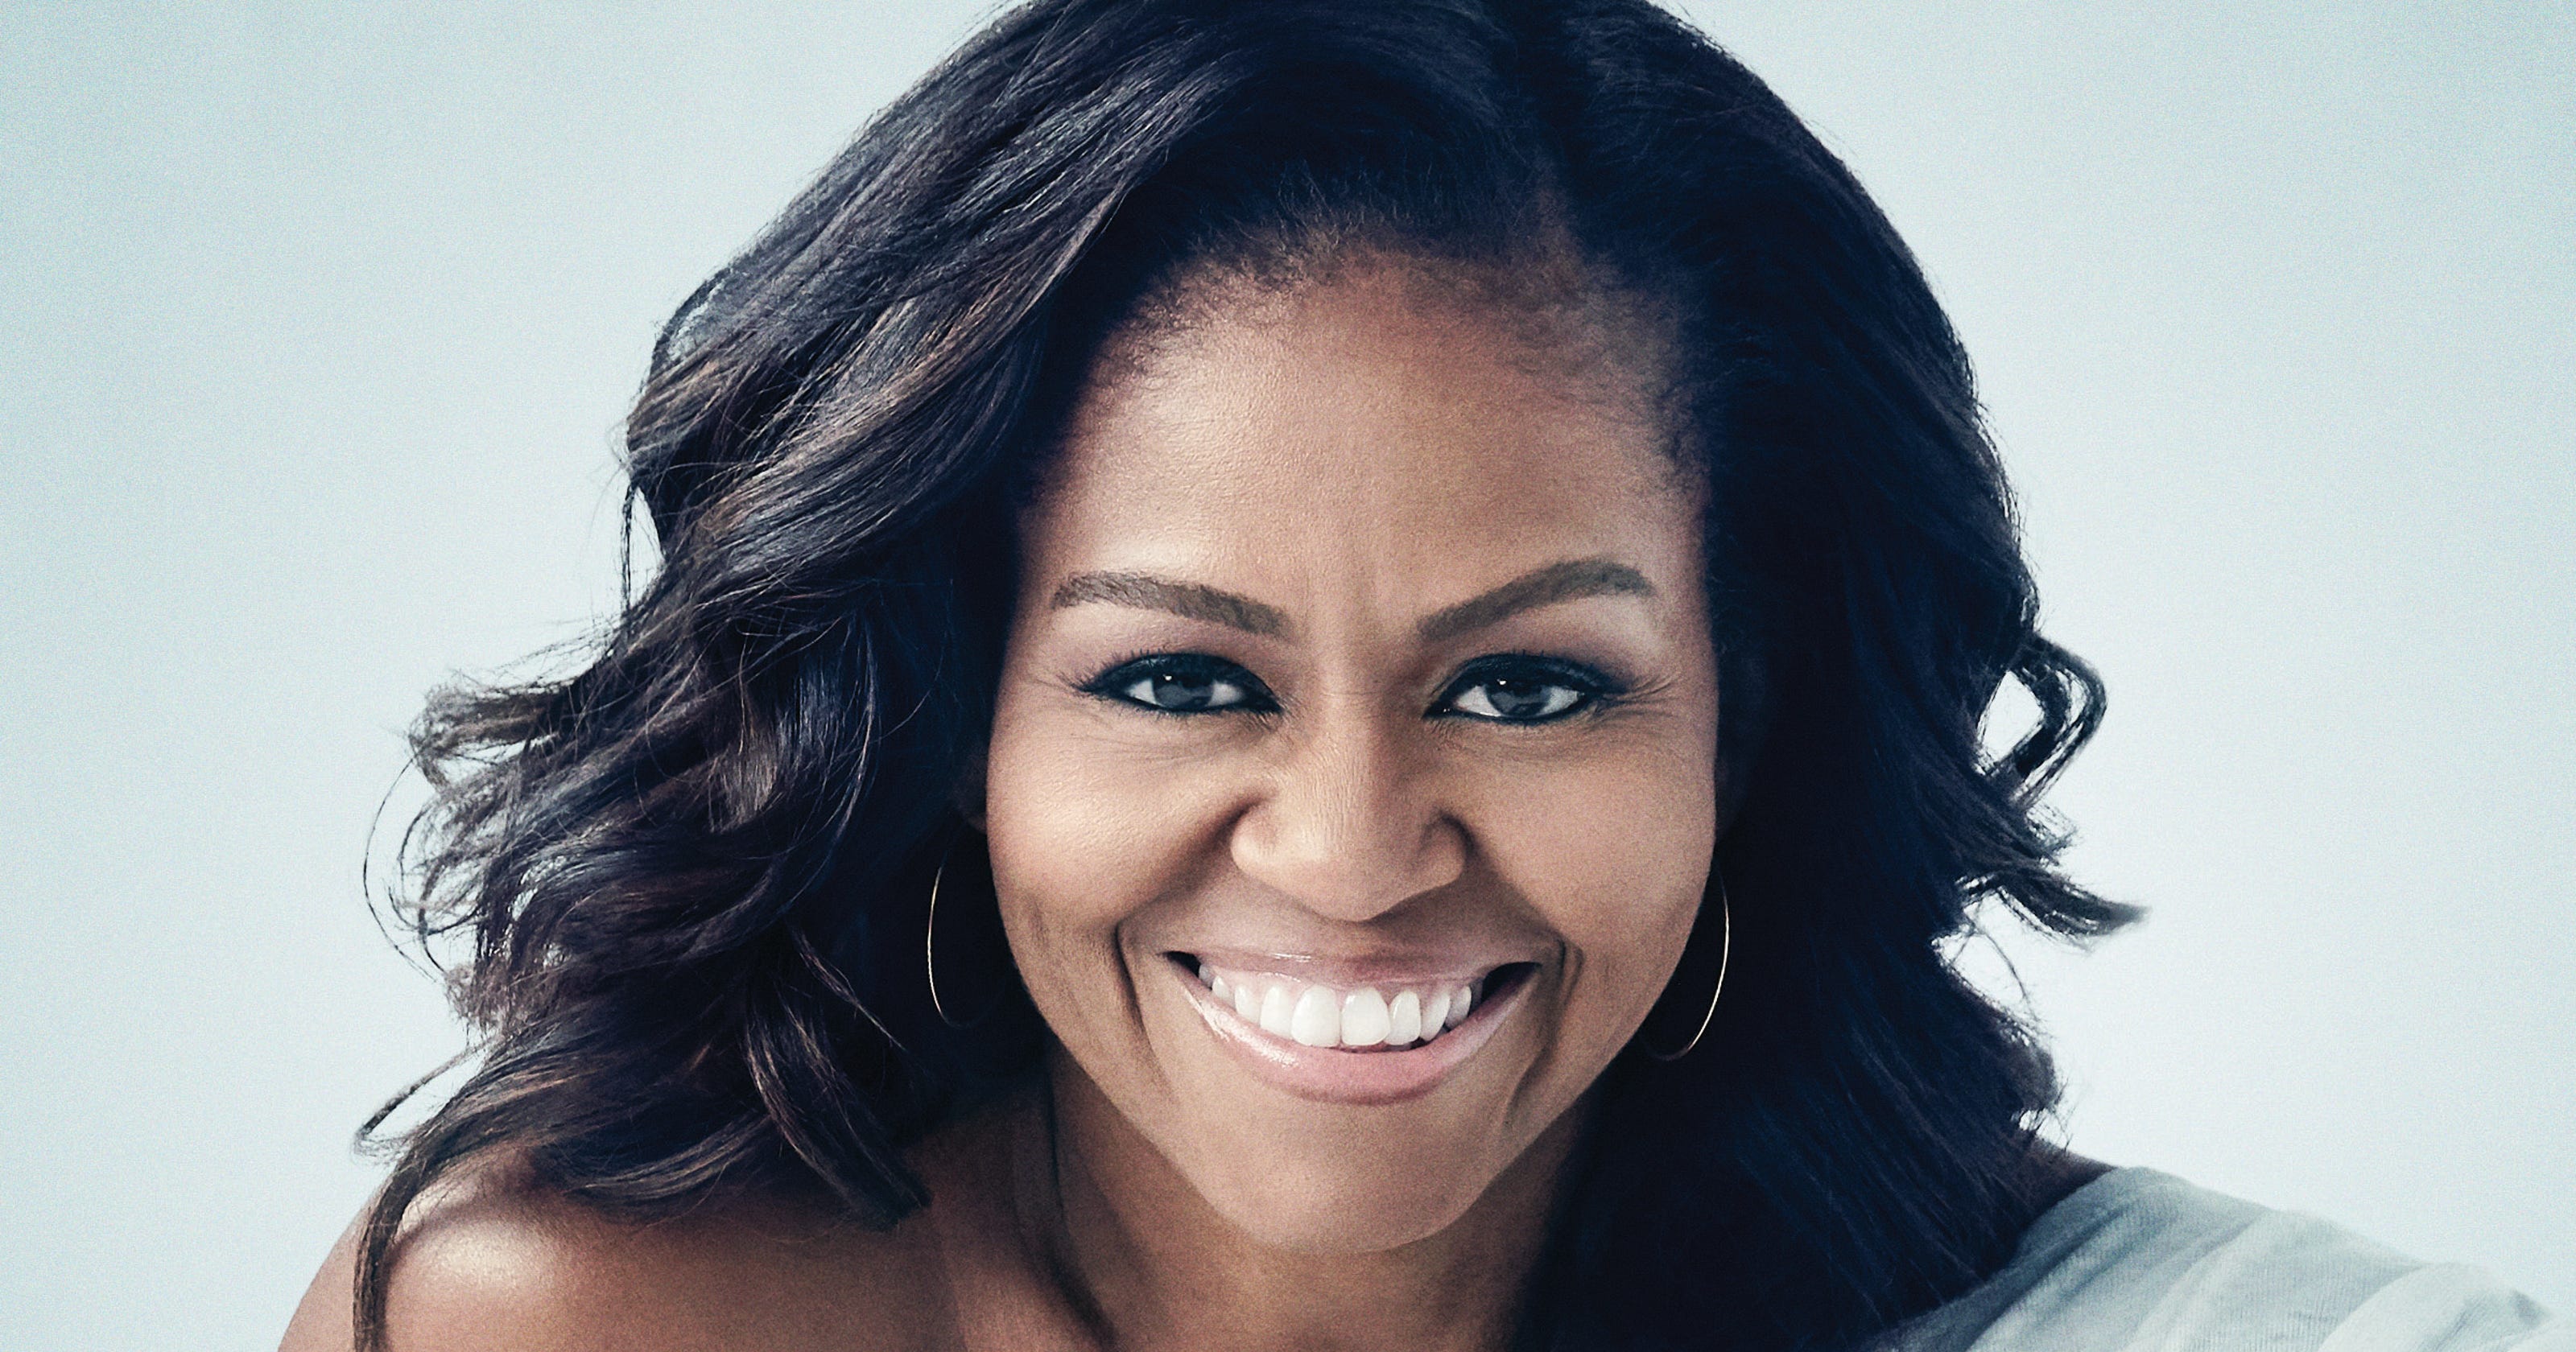 Michelle Obama to visit Milwaukee March 14 on book tour for 'Becoming'